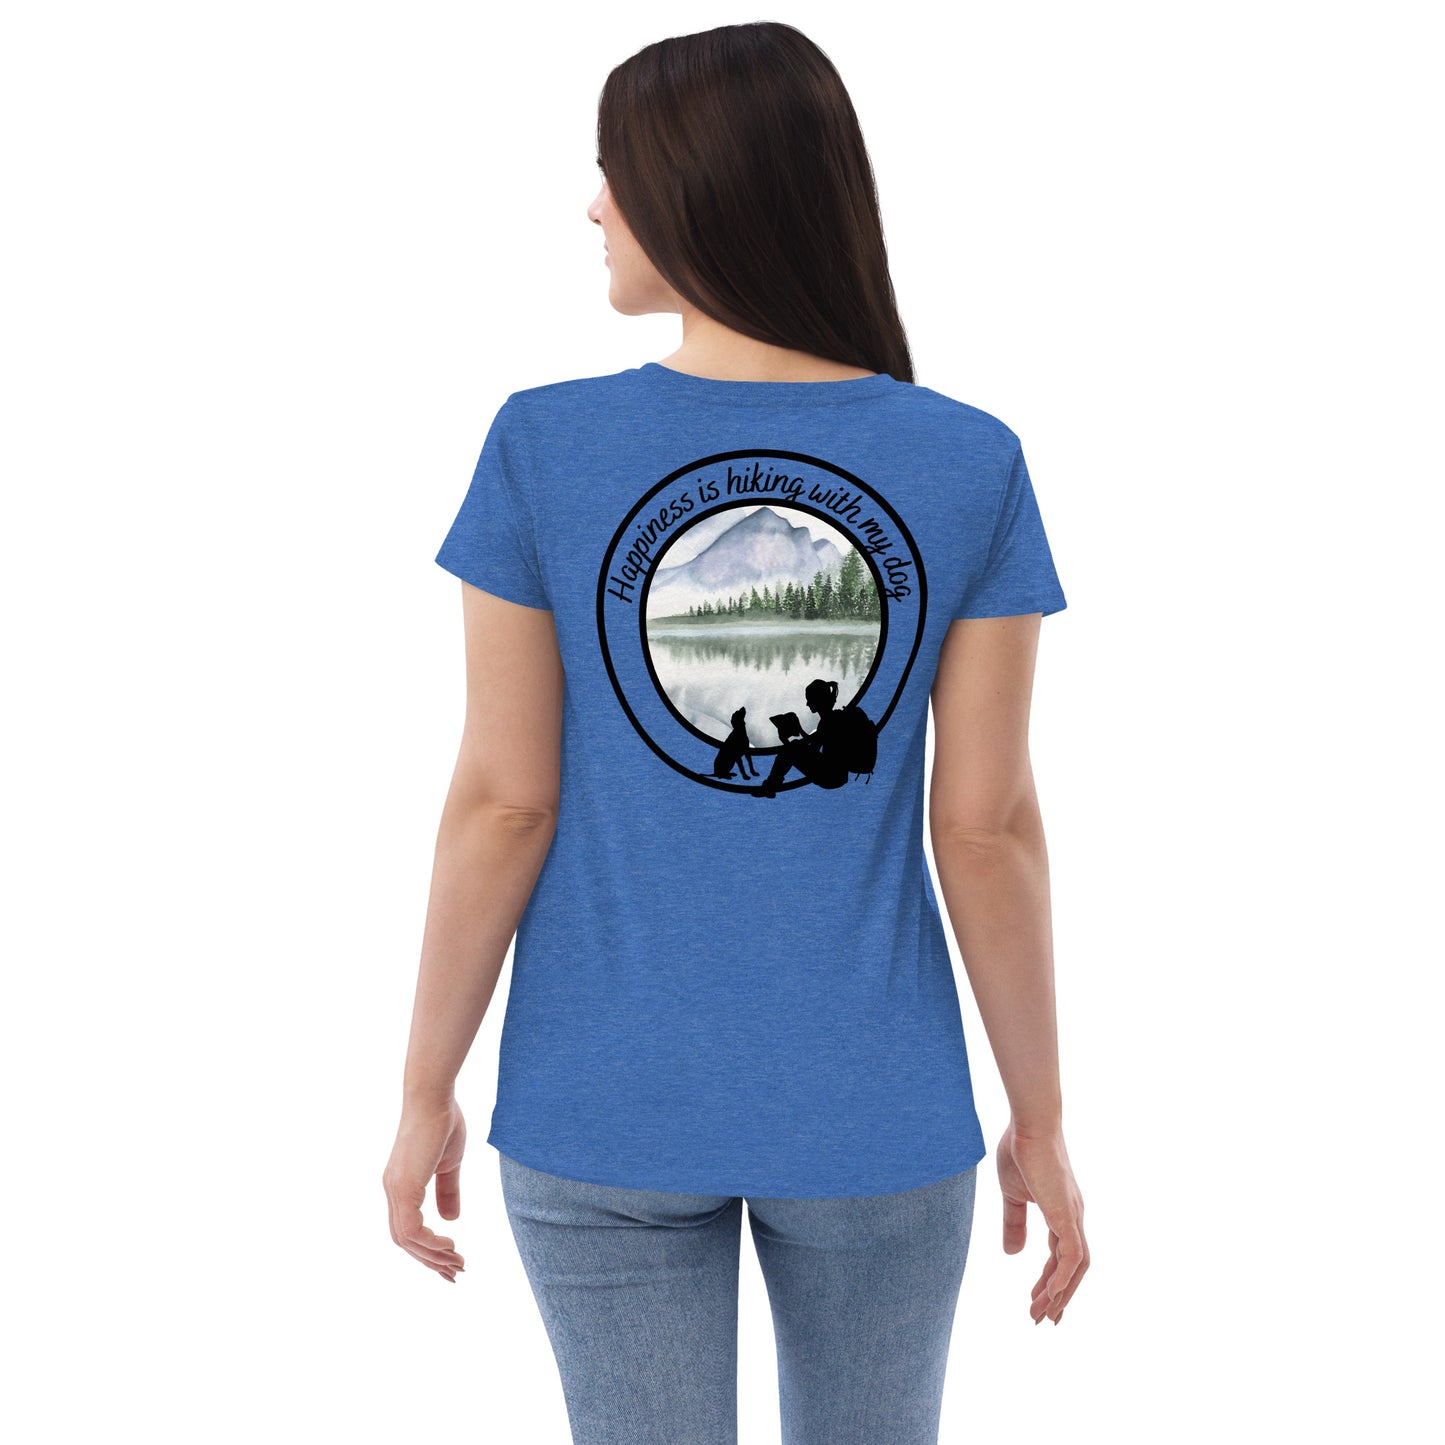 Happiness is hiking with my dog, Women’s v-neck t-shirt